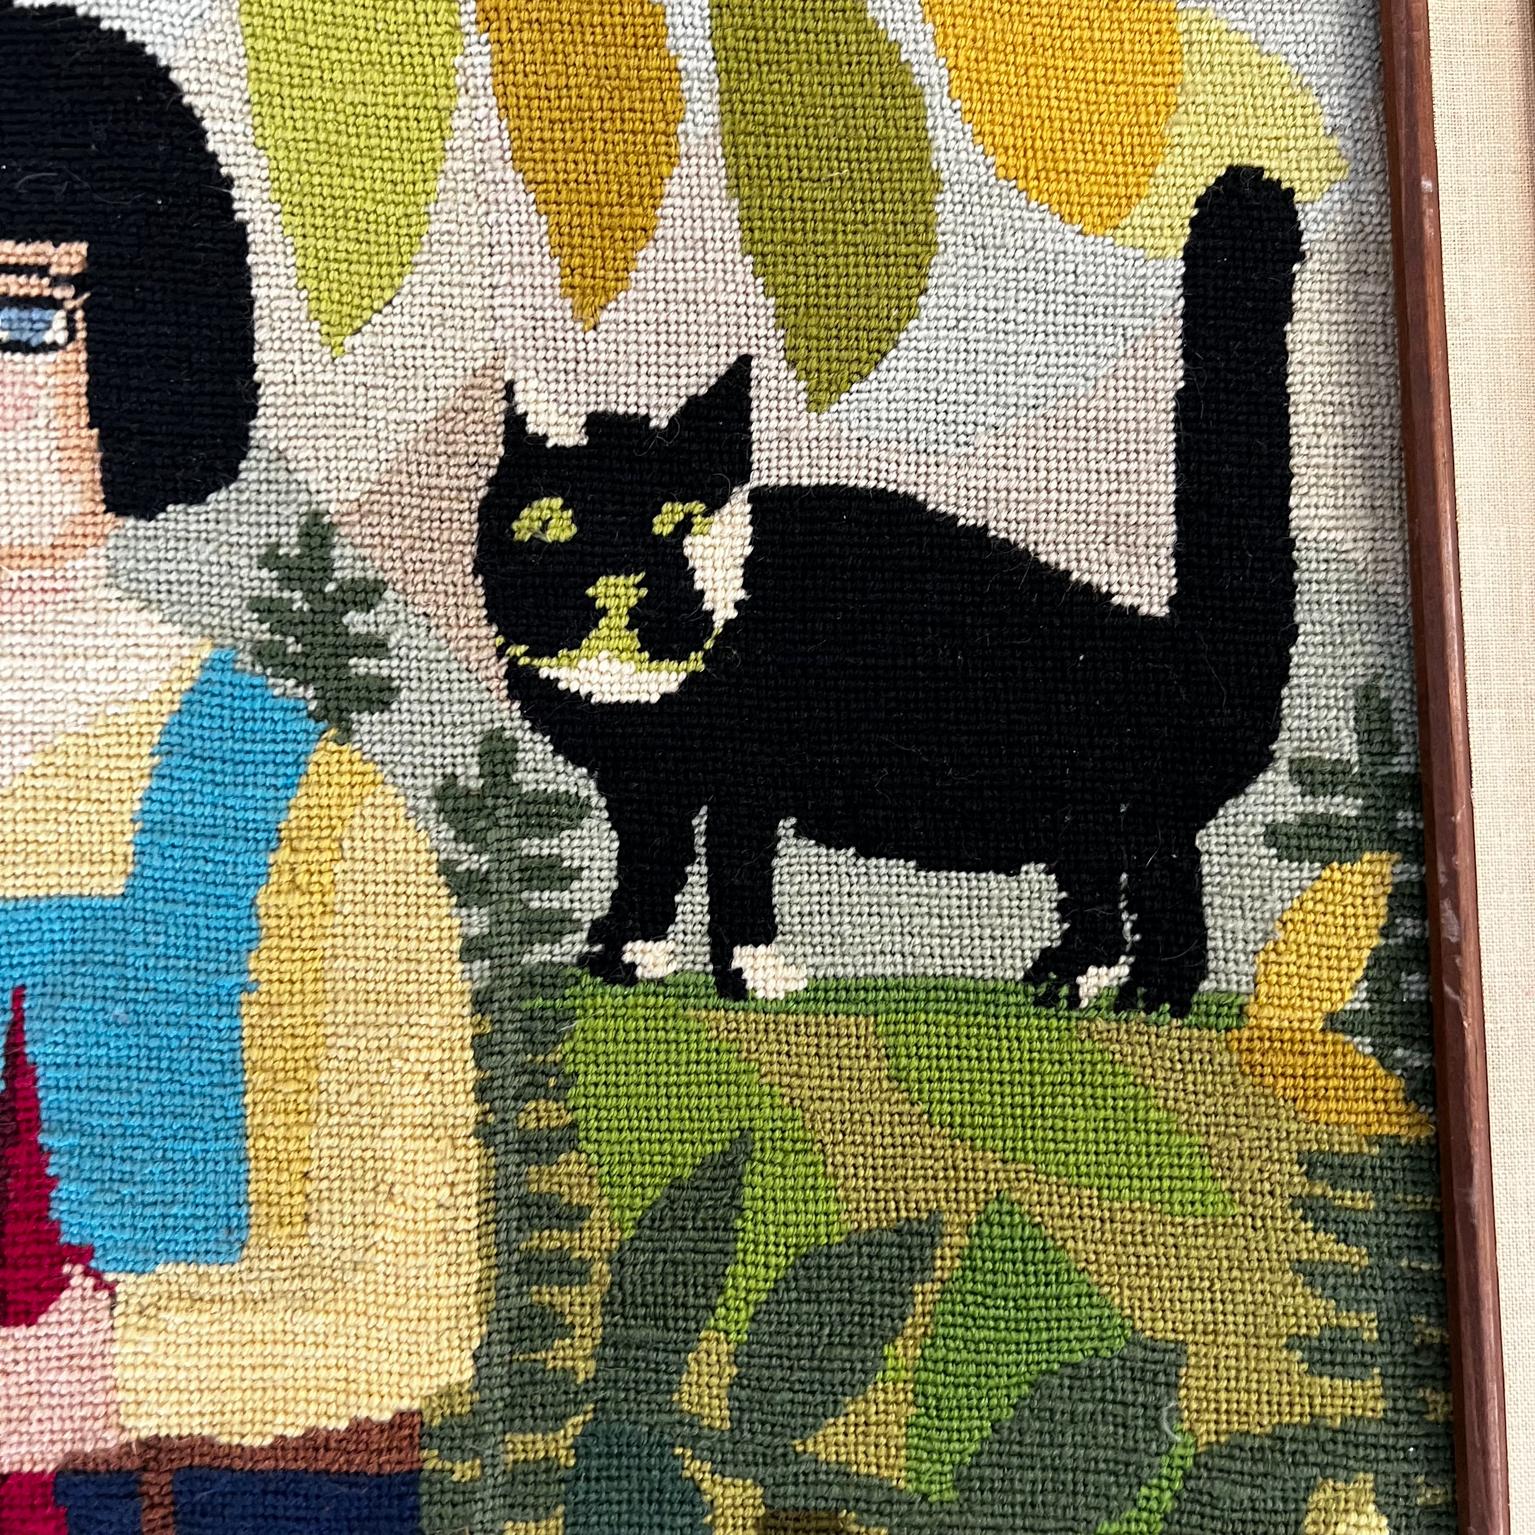 1970s Vibrant Handmade Needlepoint Embroidery Wall Artwork Girl Doll and Cat 2